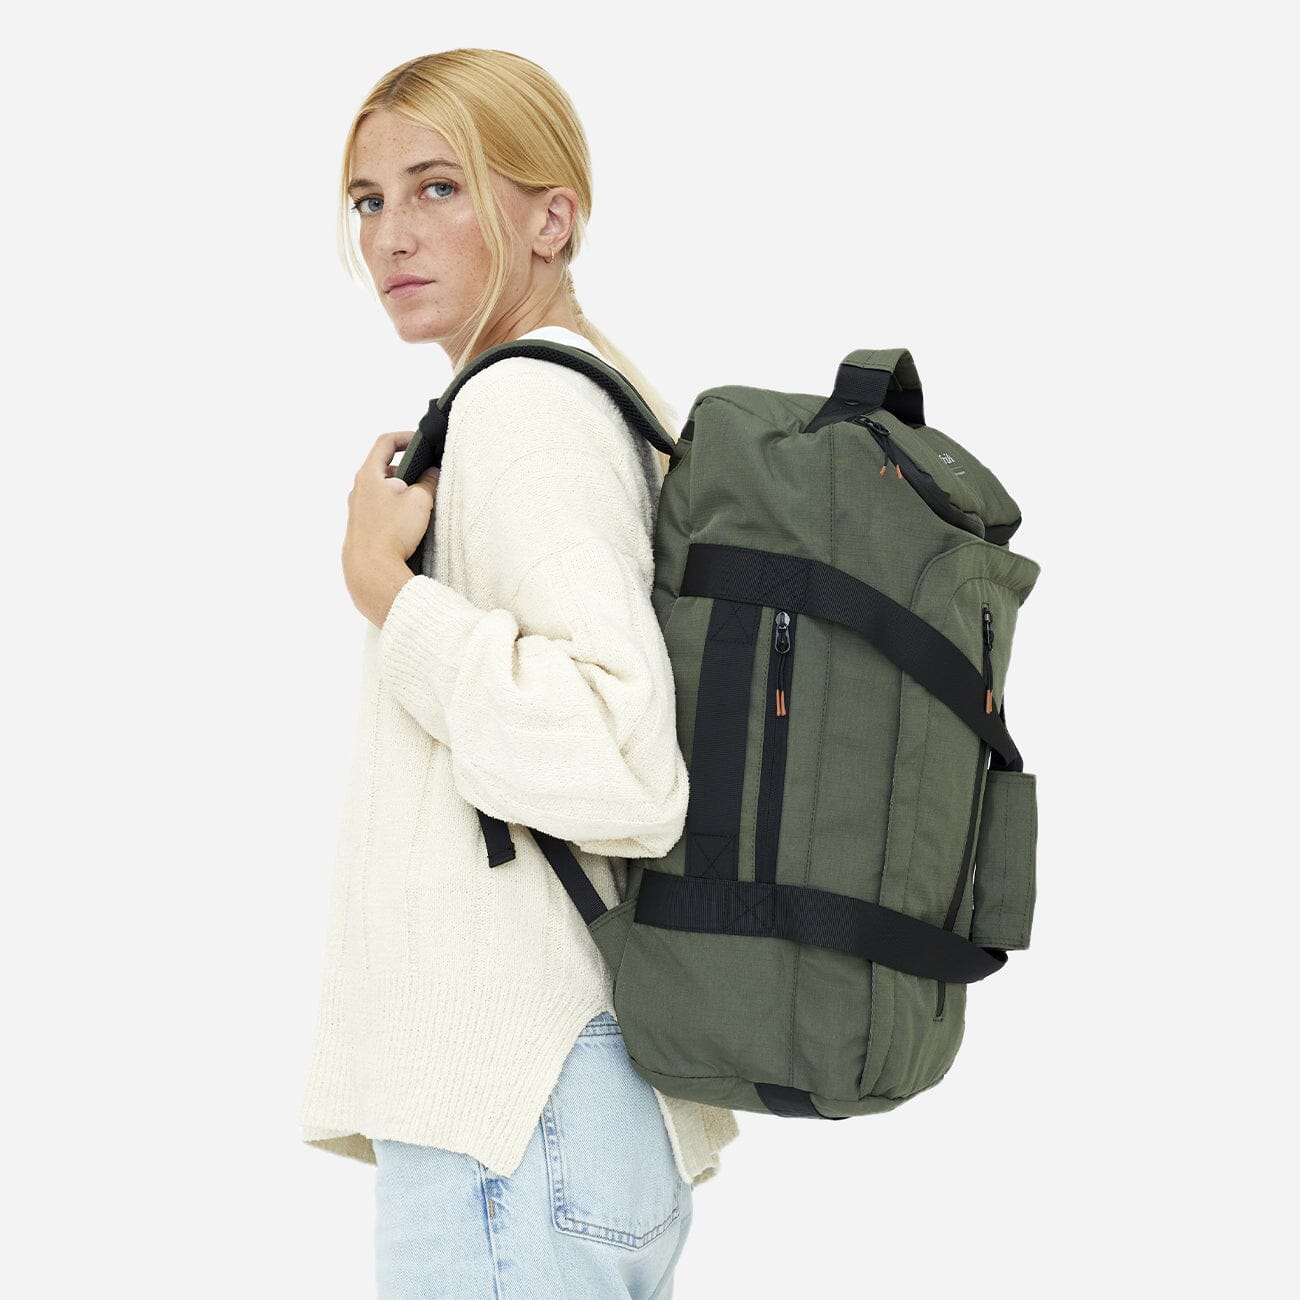 Woman wearing green convertible backpack perfect for eco-conscious travelers, side view